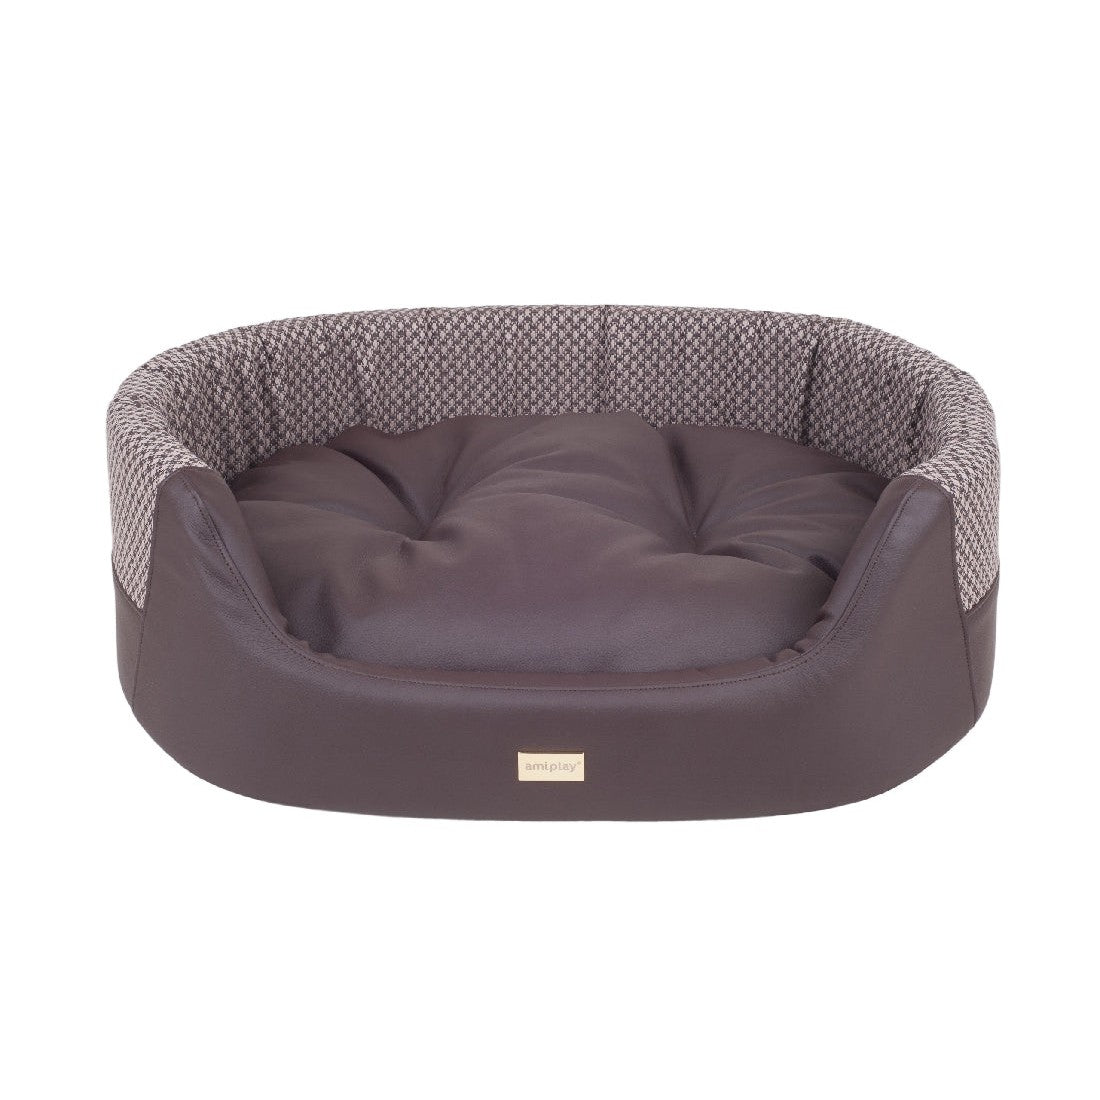 Amiplay Morgan Ellipse Dog Bed Brown-Ascot Saddlery-The Equestrian